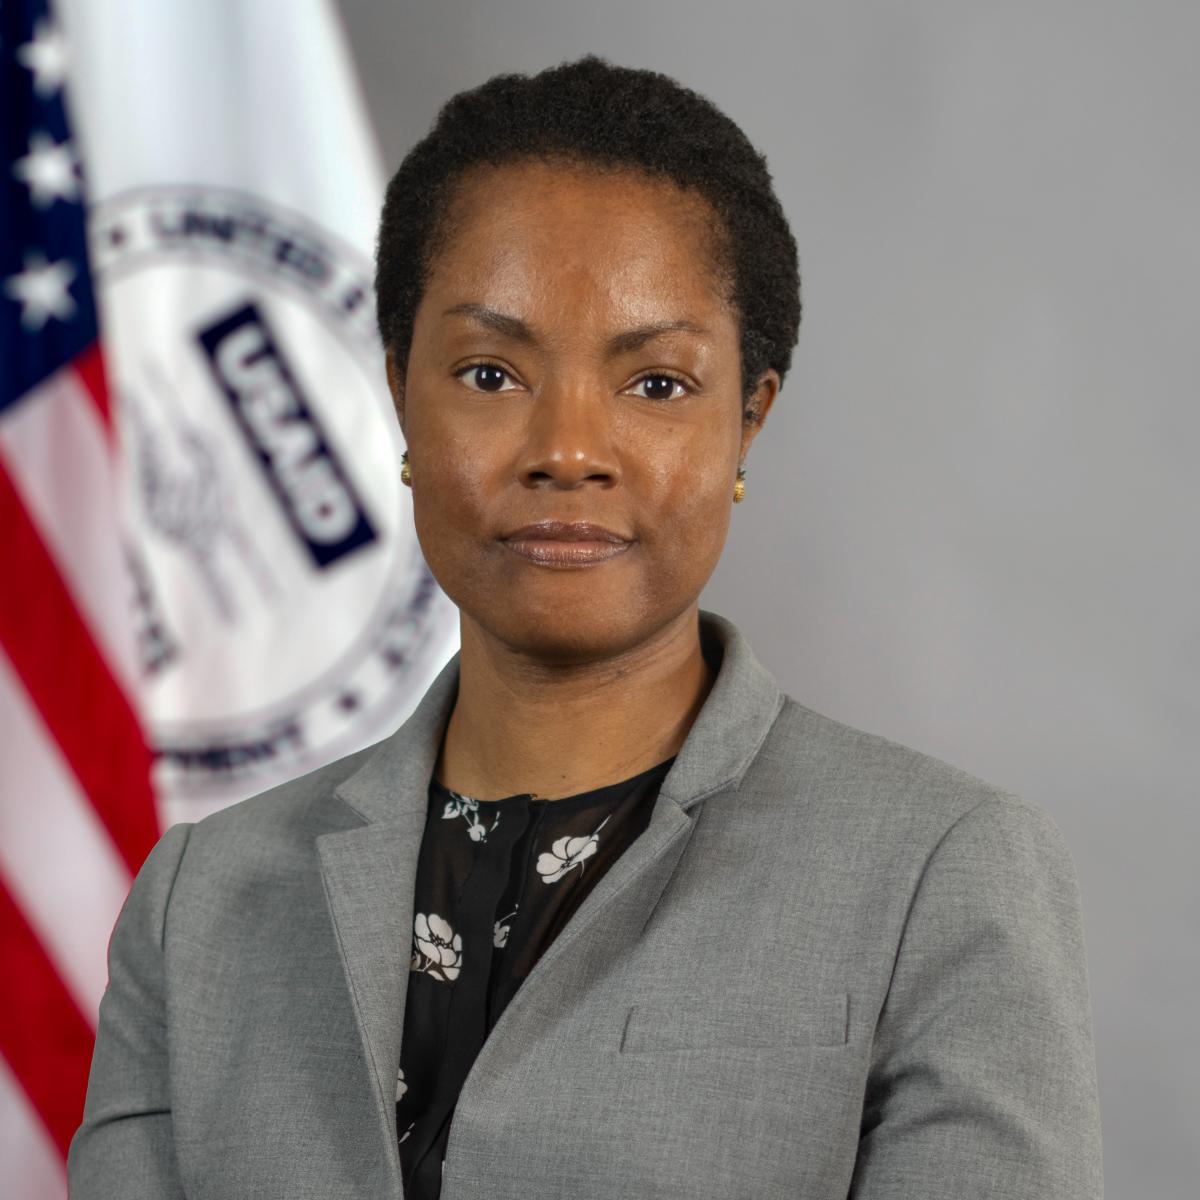 Cybill Sigler, Acting Deputy Assistant Administrator for the USAID Bureau for the Middle East 